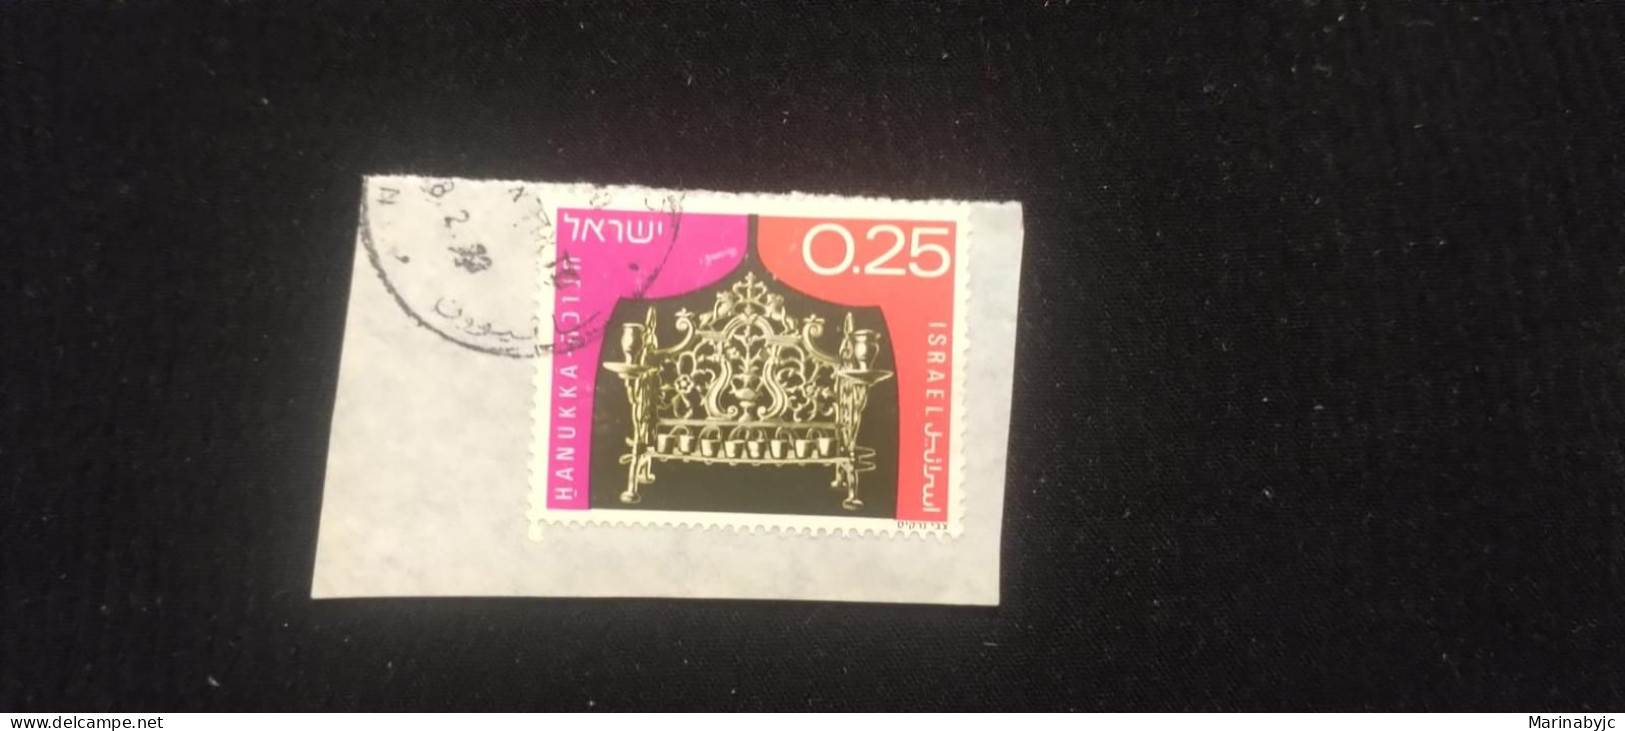 C) 569. 1972. ISRAEL. ENVELOPE SHEET WITH POLAND STAMP, 18TH CENTURY, BRASS. UC. USED. - Autres - Asie